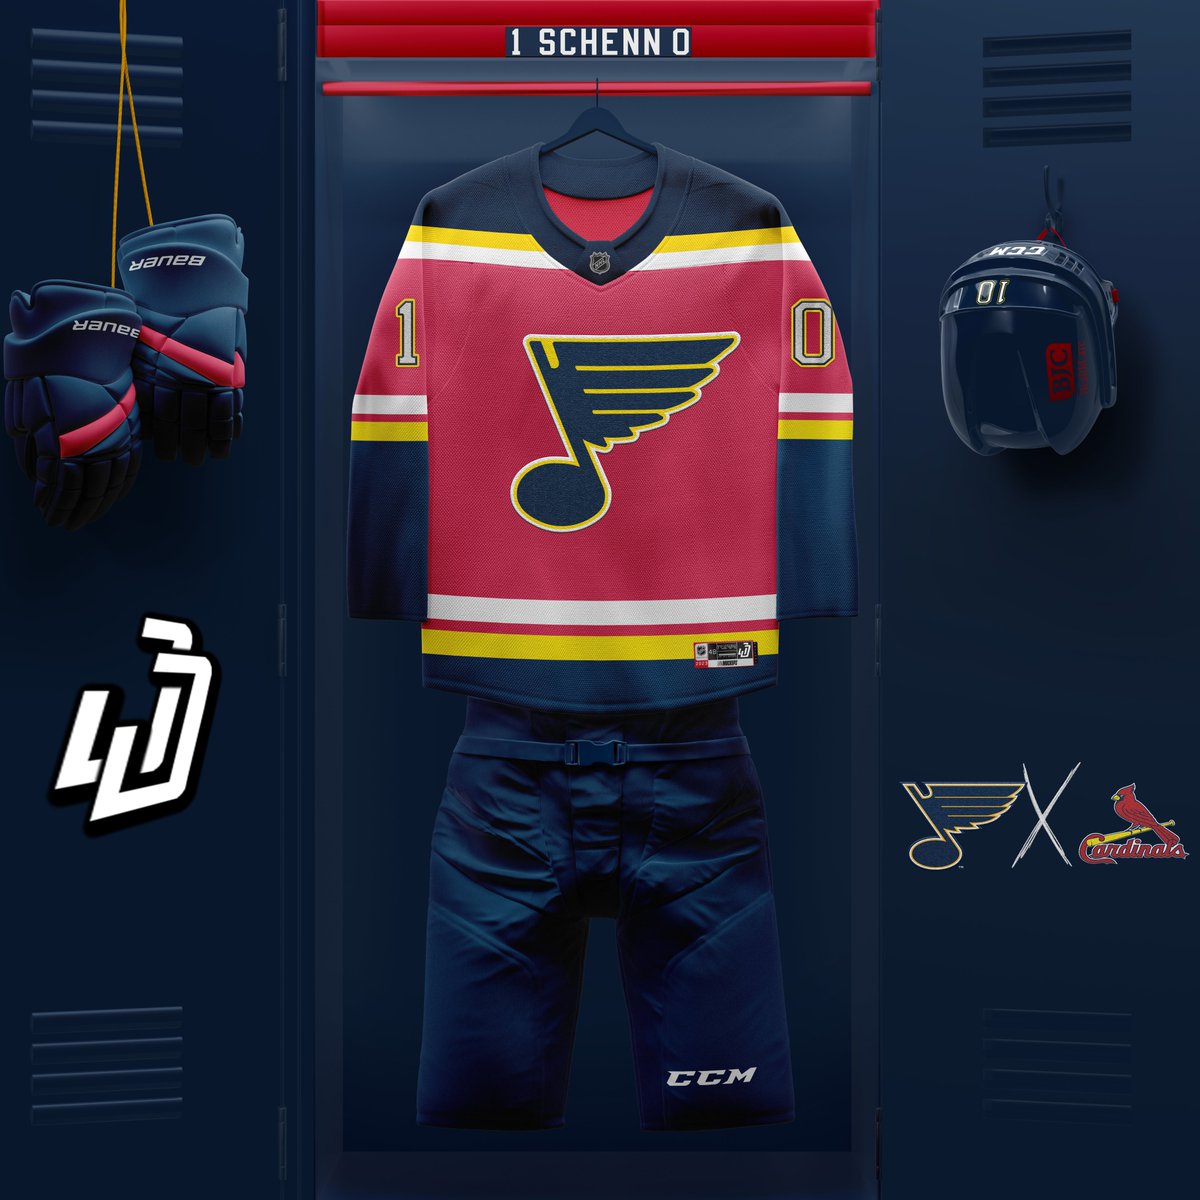 Team 5 in the series is a wrap, this kind of turned out like those weird Blues uniforms from the 90's that I really liked. Here is what the @StLouisBlues would look like outfitted in the colorways of the @Cardinals, basically the last other major sports franchise left in St.…